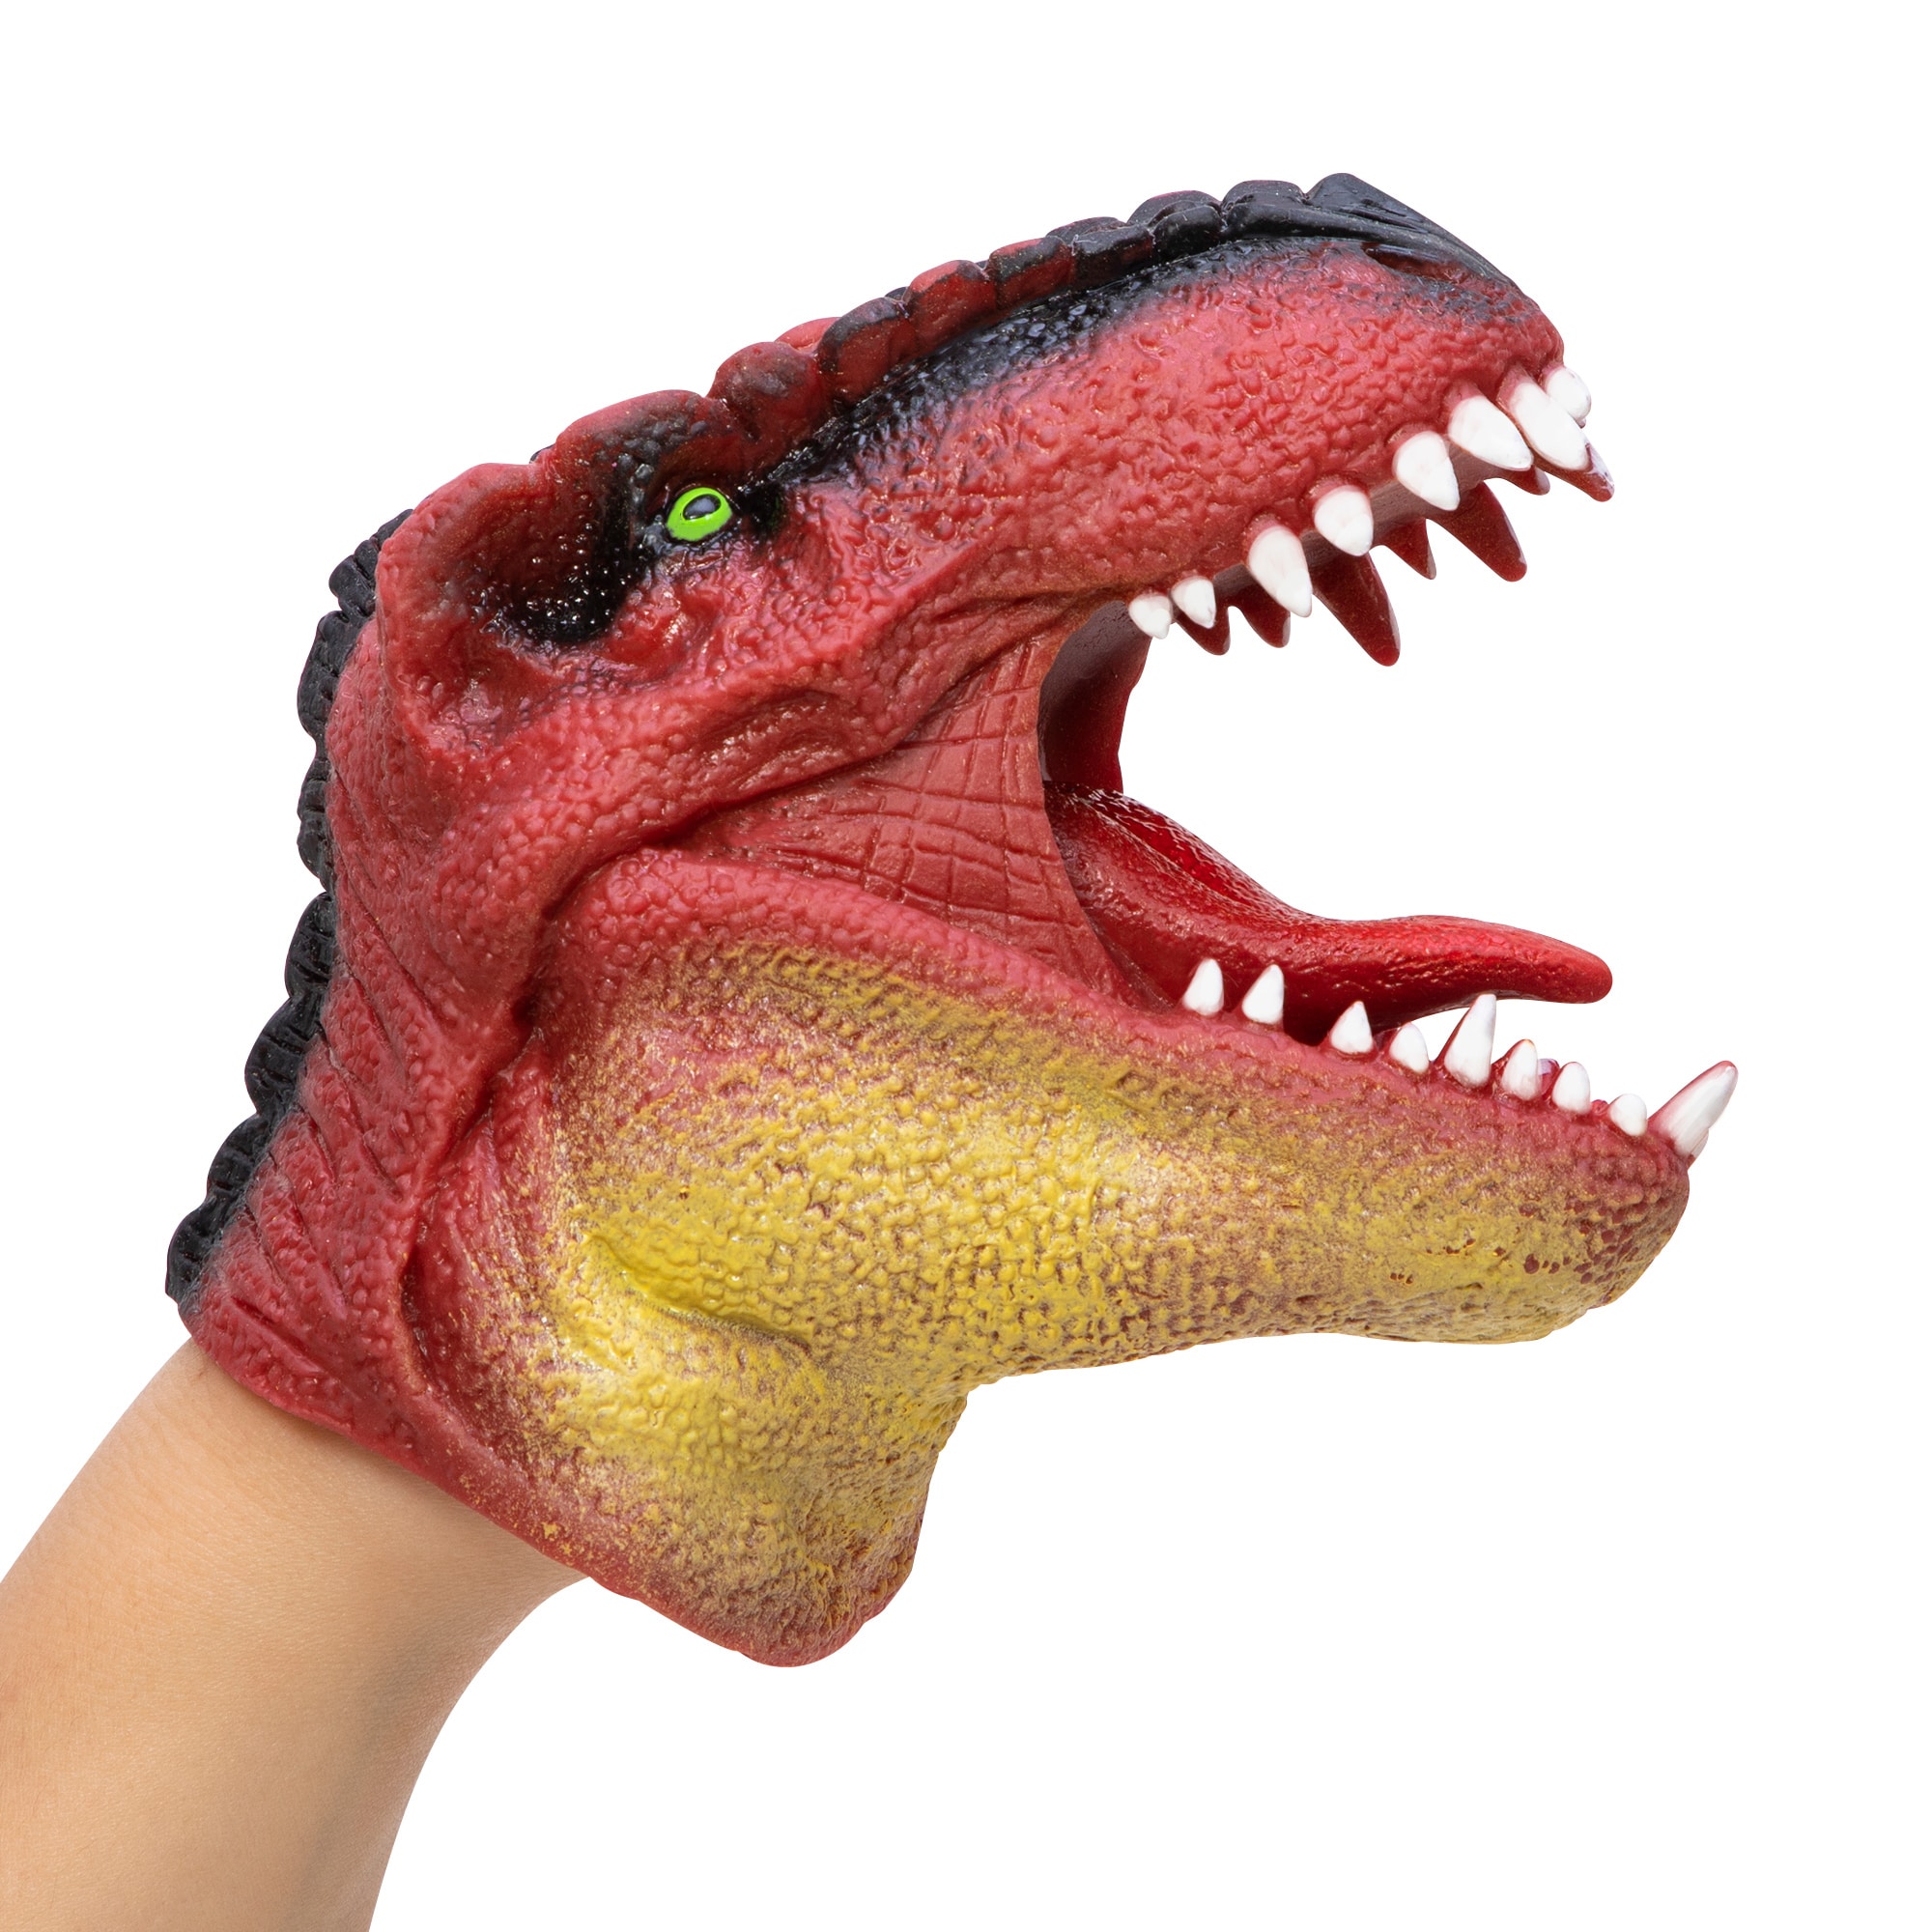 Single THRILLING T-Rex Dinosaur Hand Puppet Stretchy SOFT Dino Party Creature 